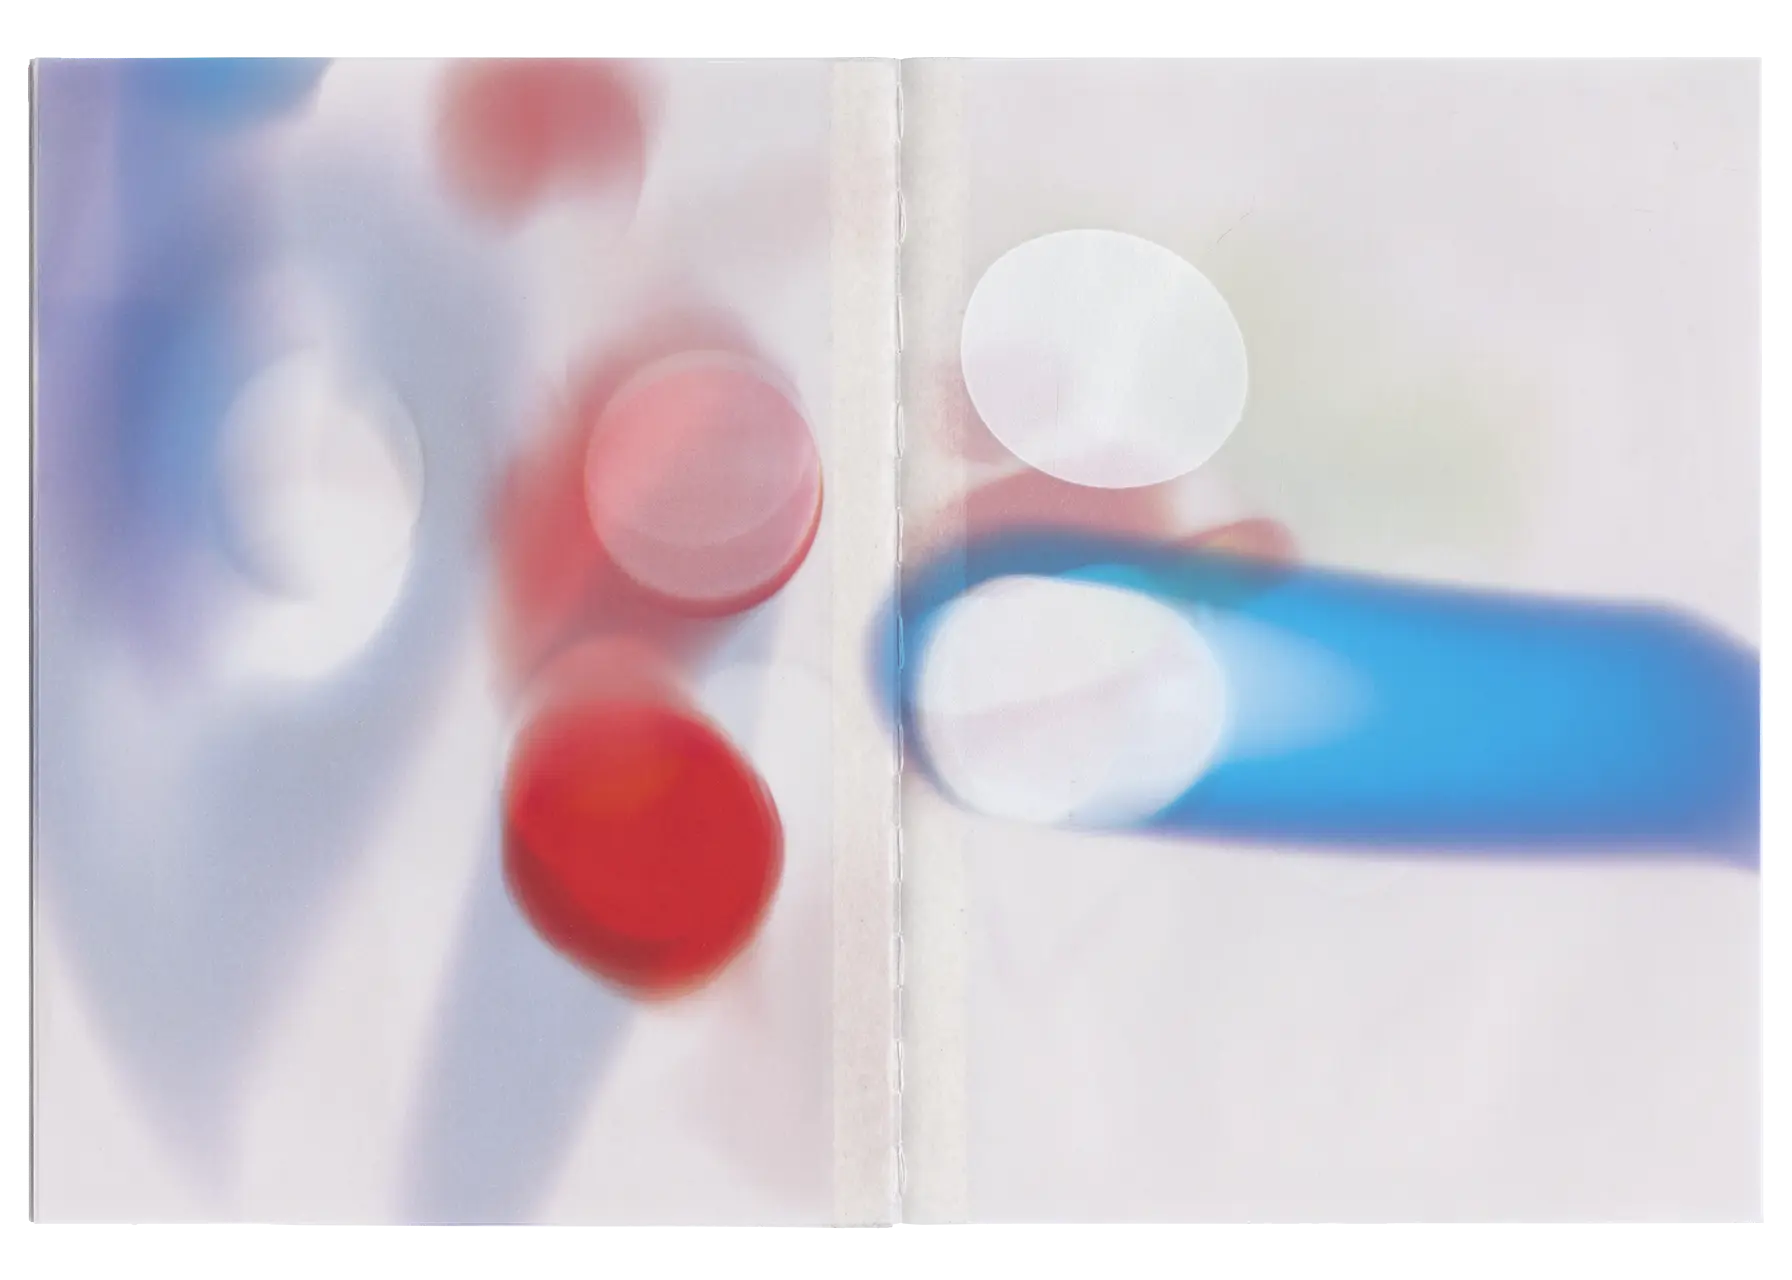 Thirteenth spread of the Bloom book, in this spread is the blur and extracted bloom of a blue car’s red rear brake light. Notably, the images were printed using a UV printer directly onto the pre-bound pages. As a result, the binding thread in the book's seam has taken on some of the color from the images.